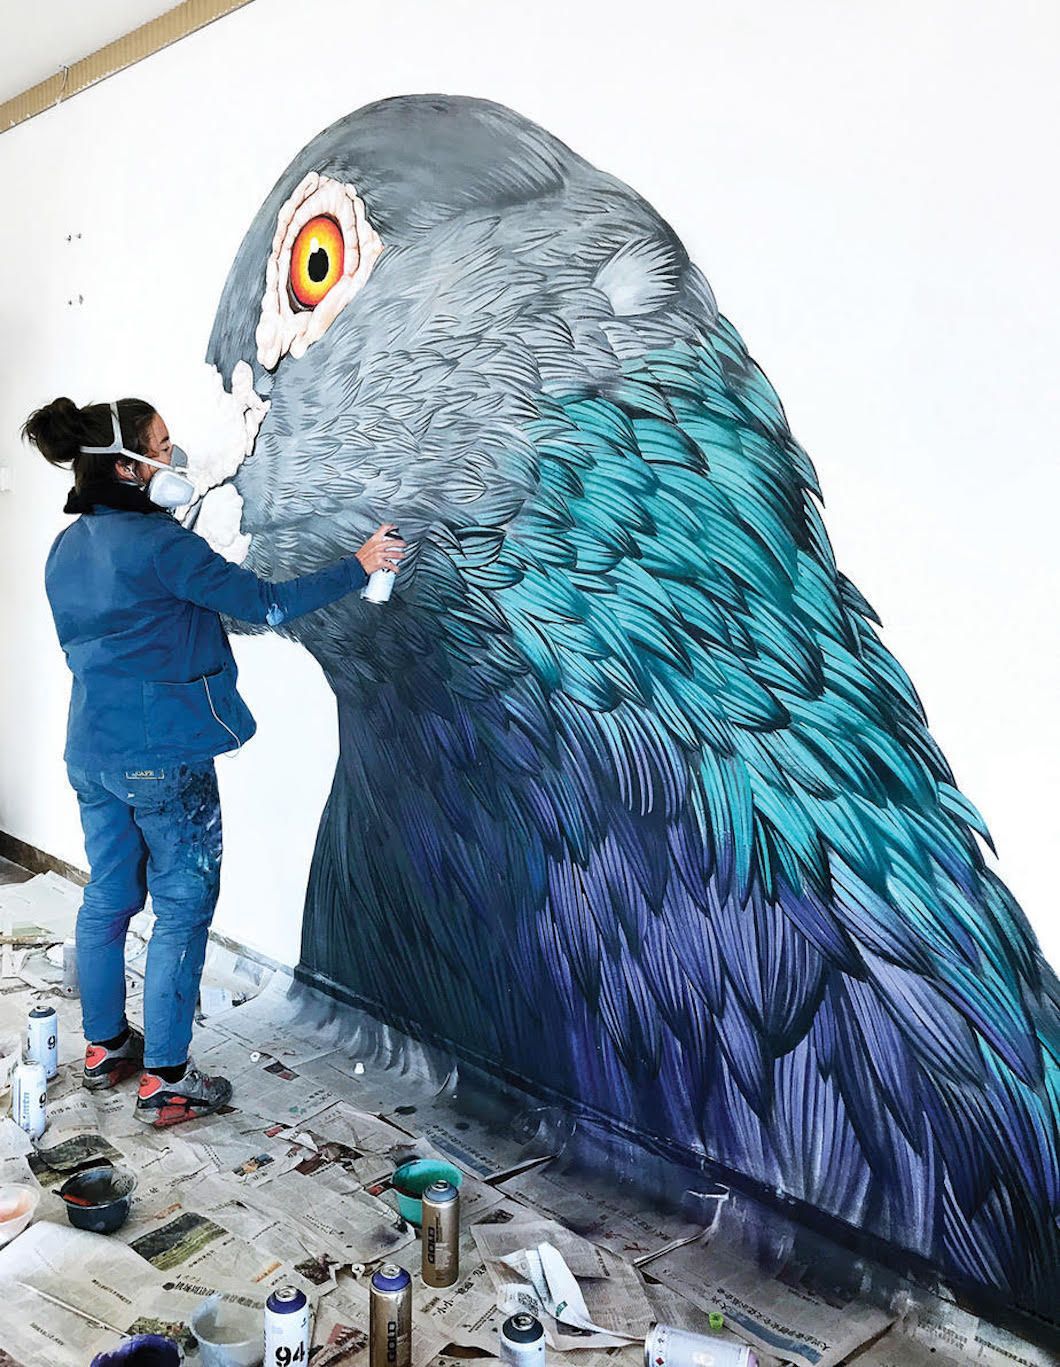 Massive Paintings Of Pigeons Reveal The Street Birds' Unexpected Beauty |  Arte De Aves, Arte Mural, Murales Within Pigeon Wall Art (View 13 of 15)